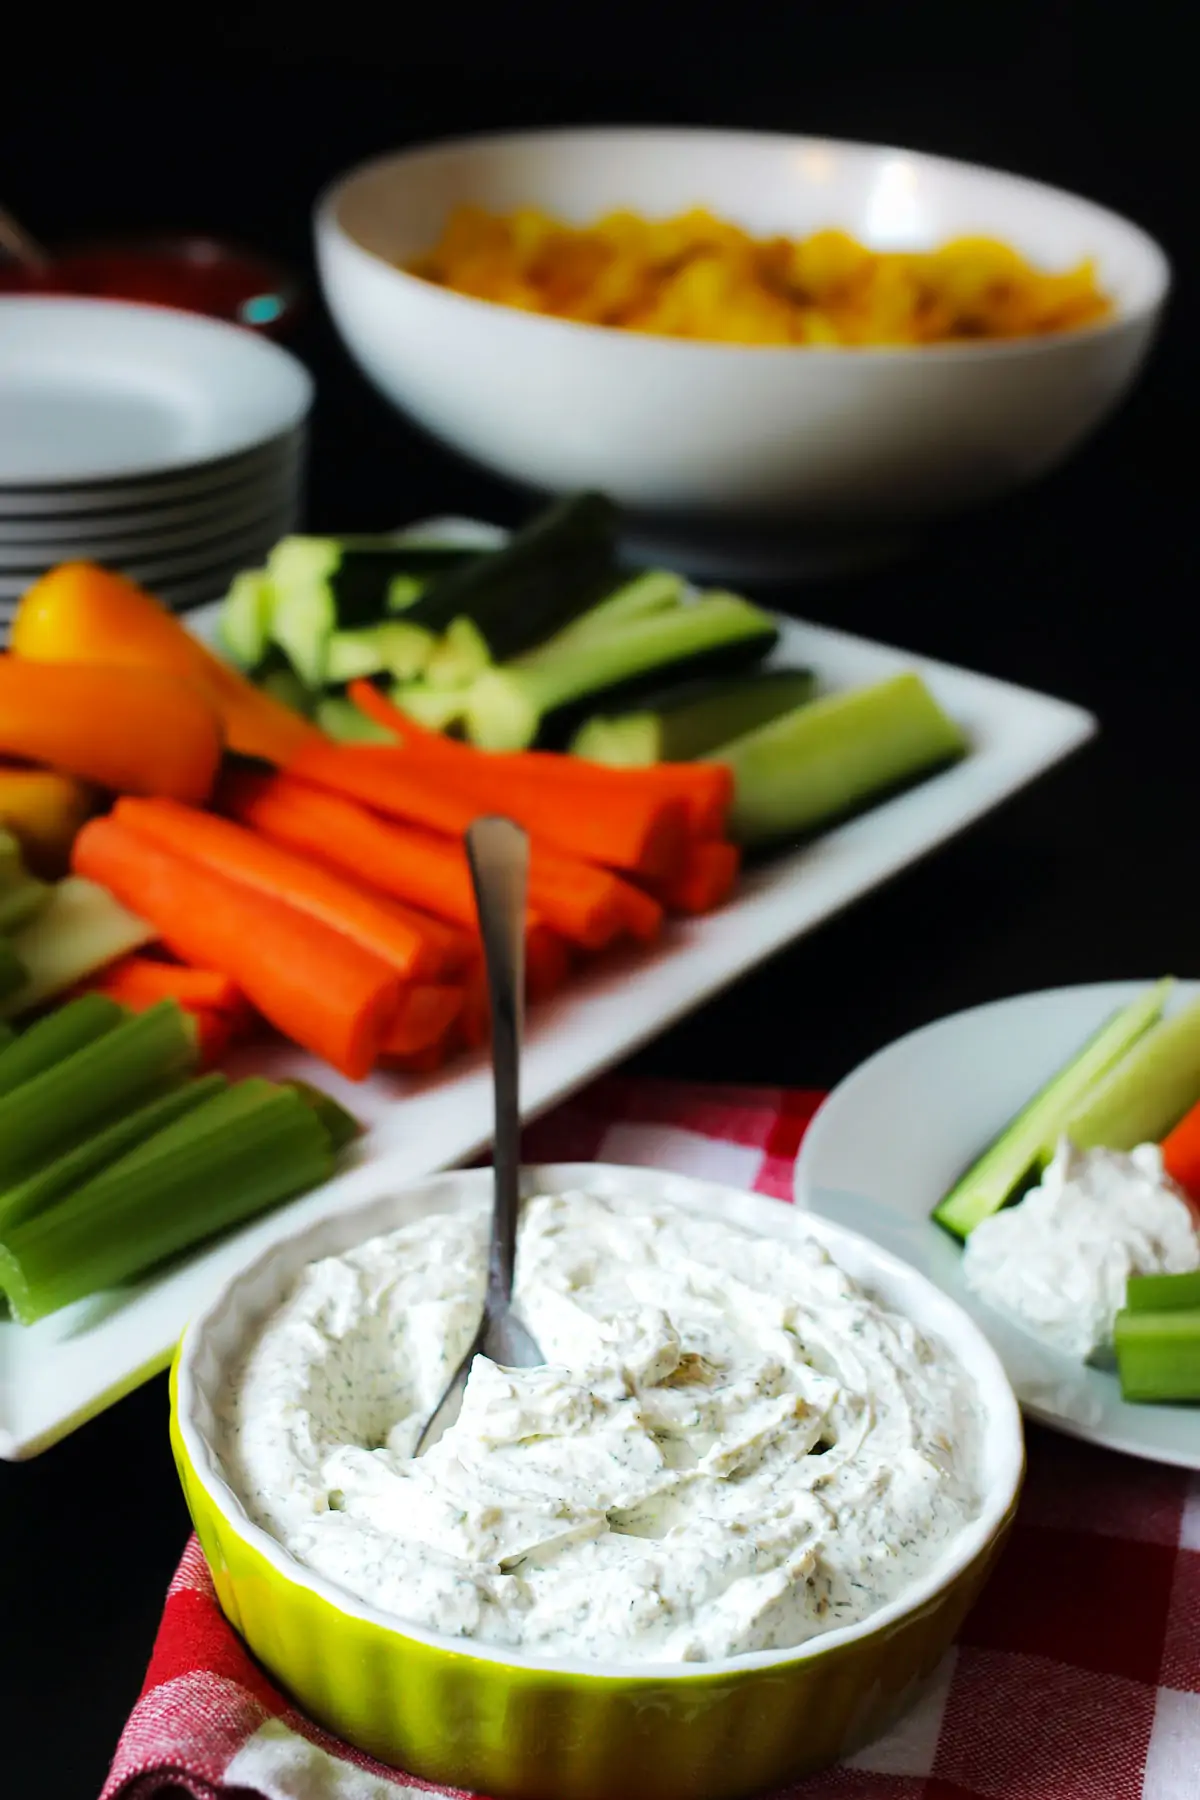 dill dip in green dish on table with platters of veggies and chips.